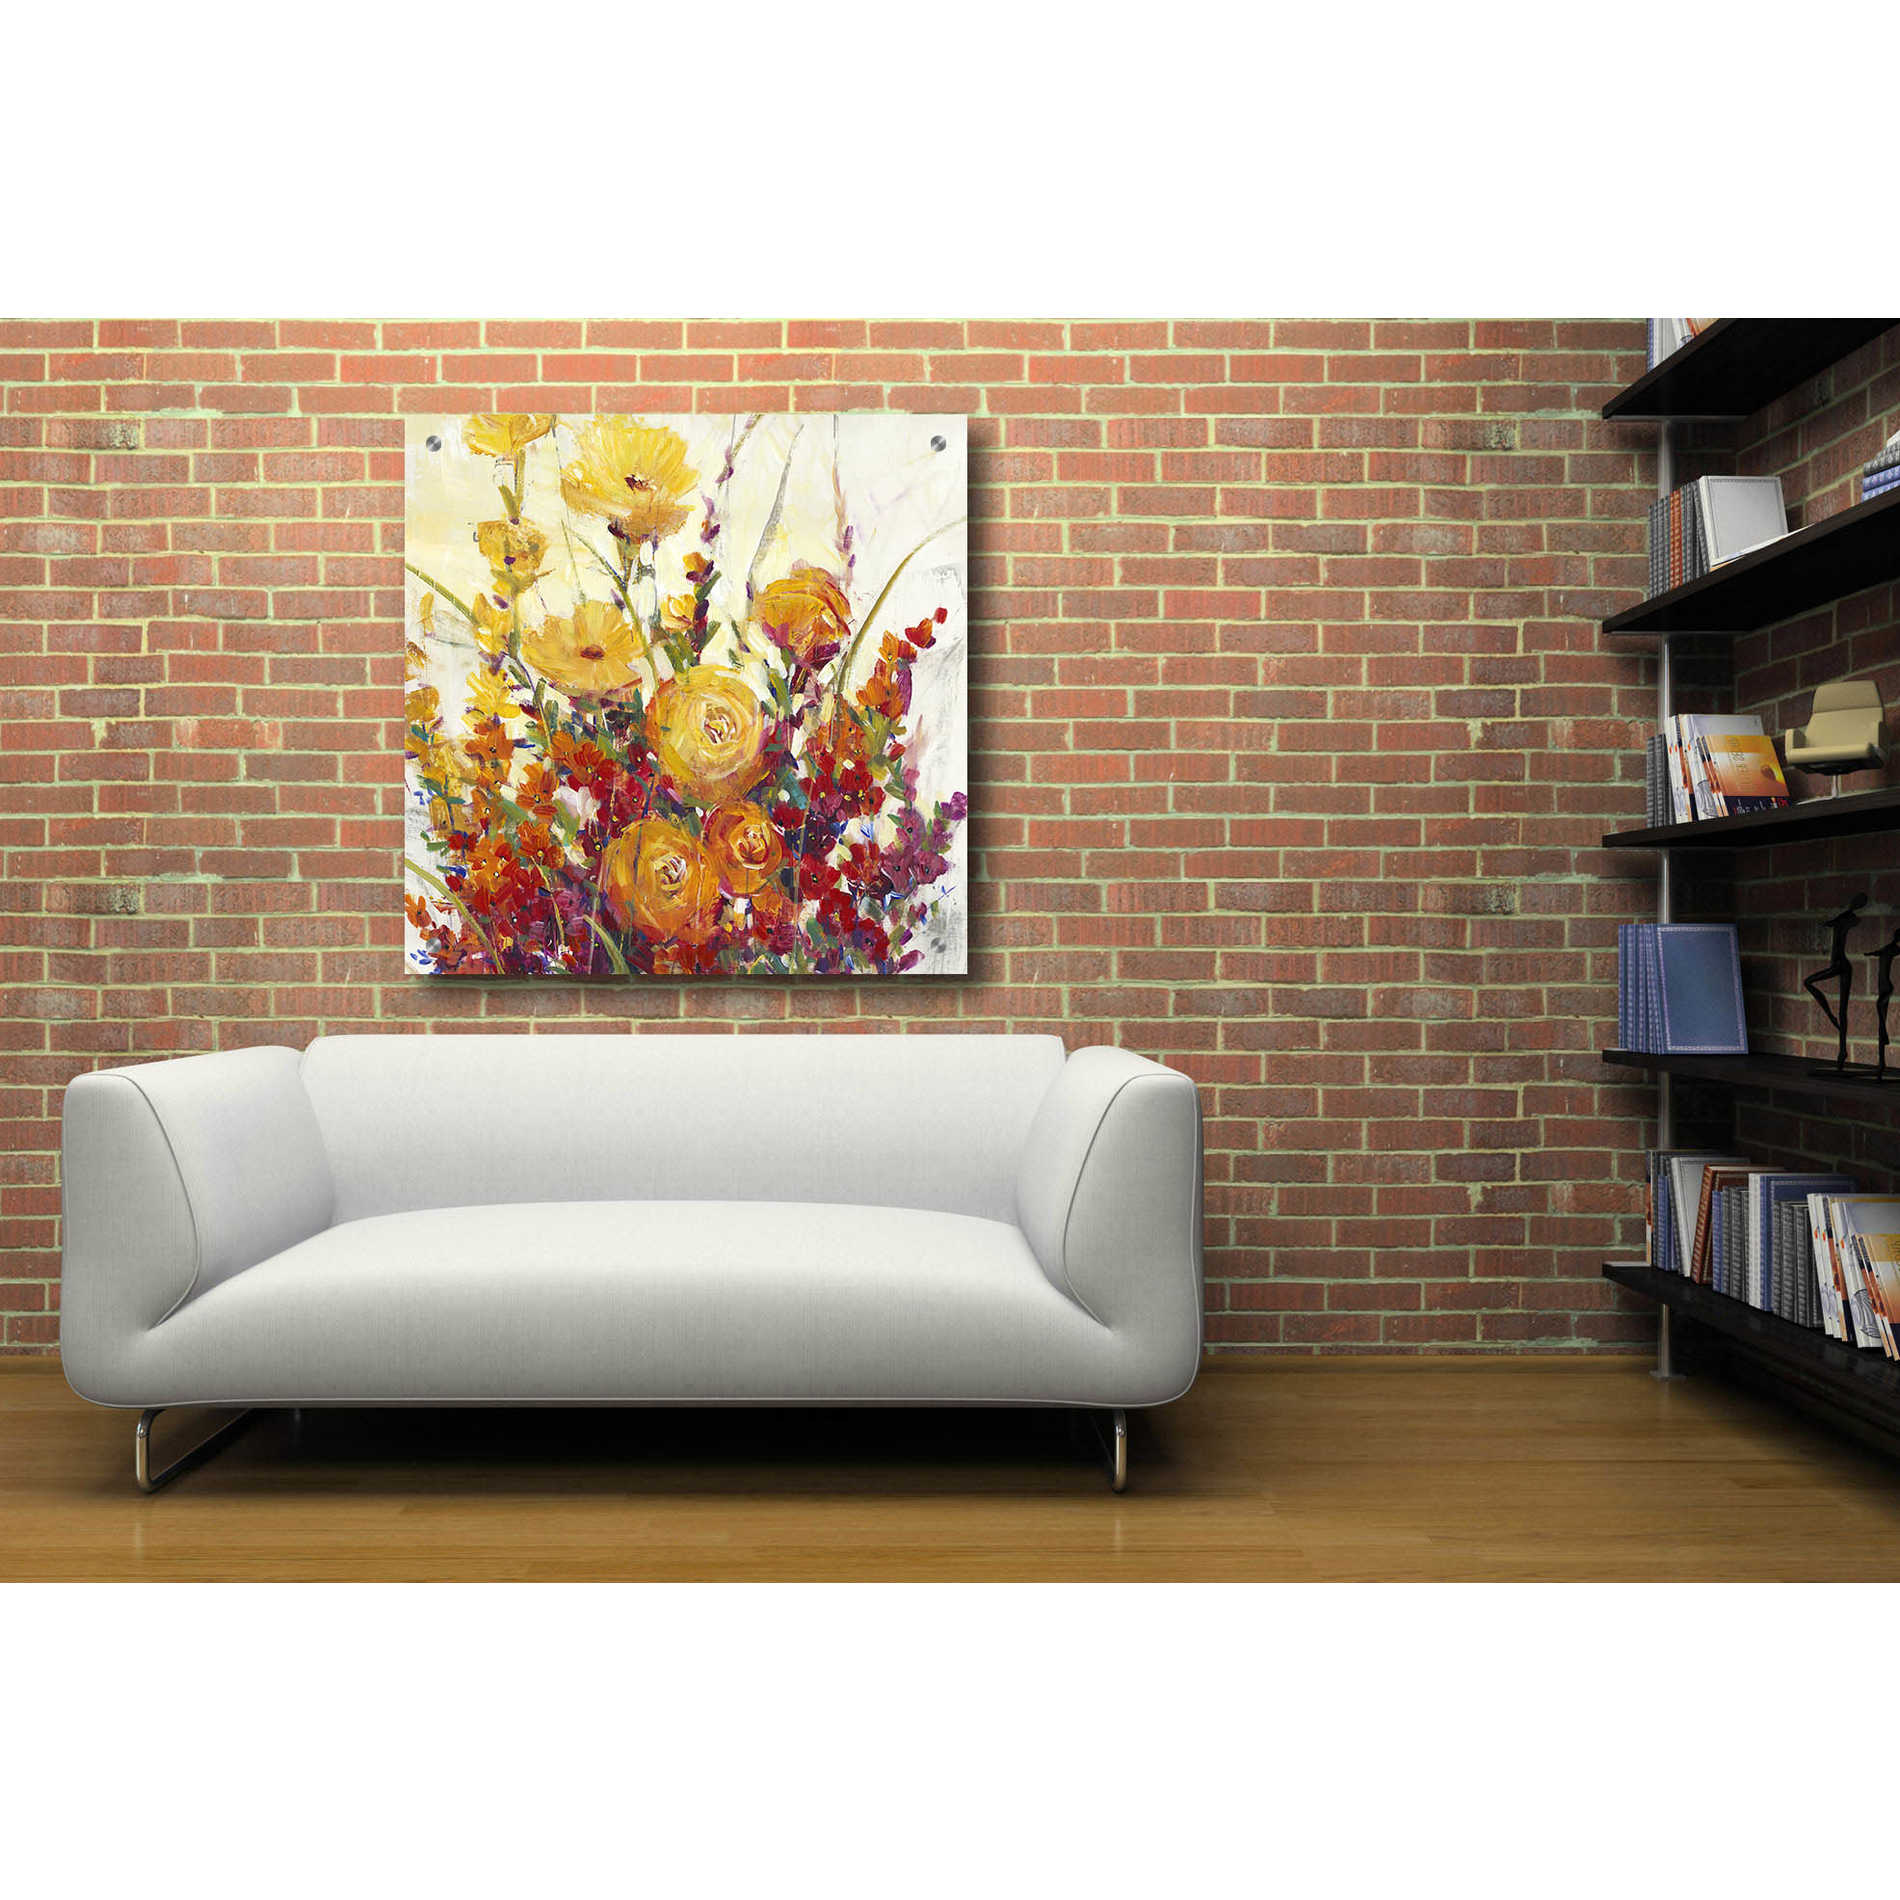 Epic Art 'Mixed Bouquet I' by Tim O'Toole, Acrylic Glass Wall Art,36x36